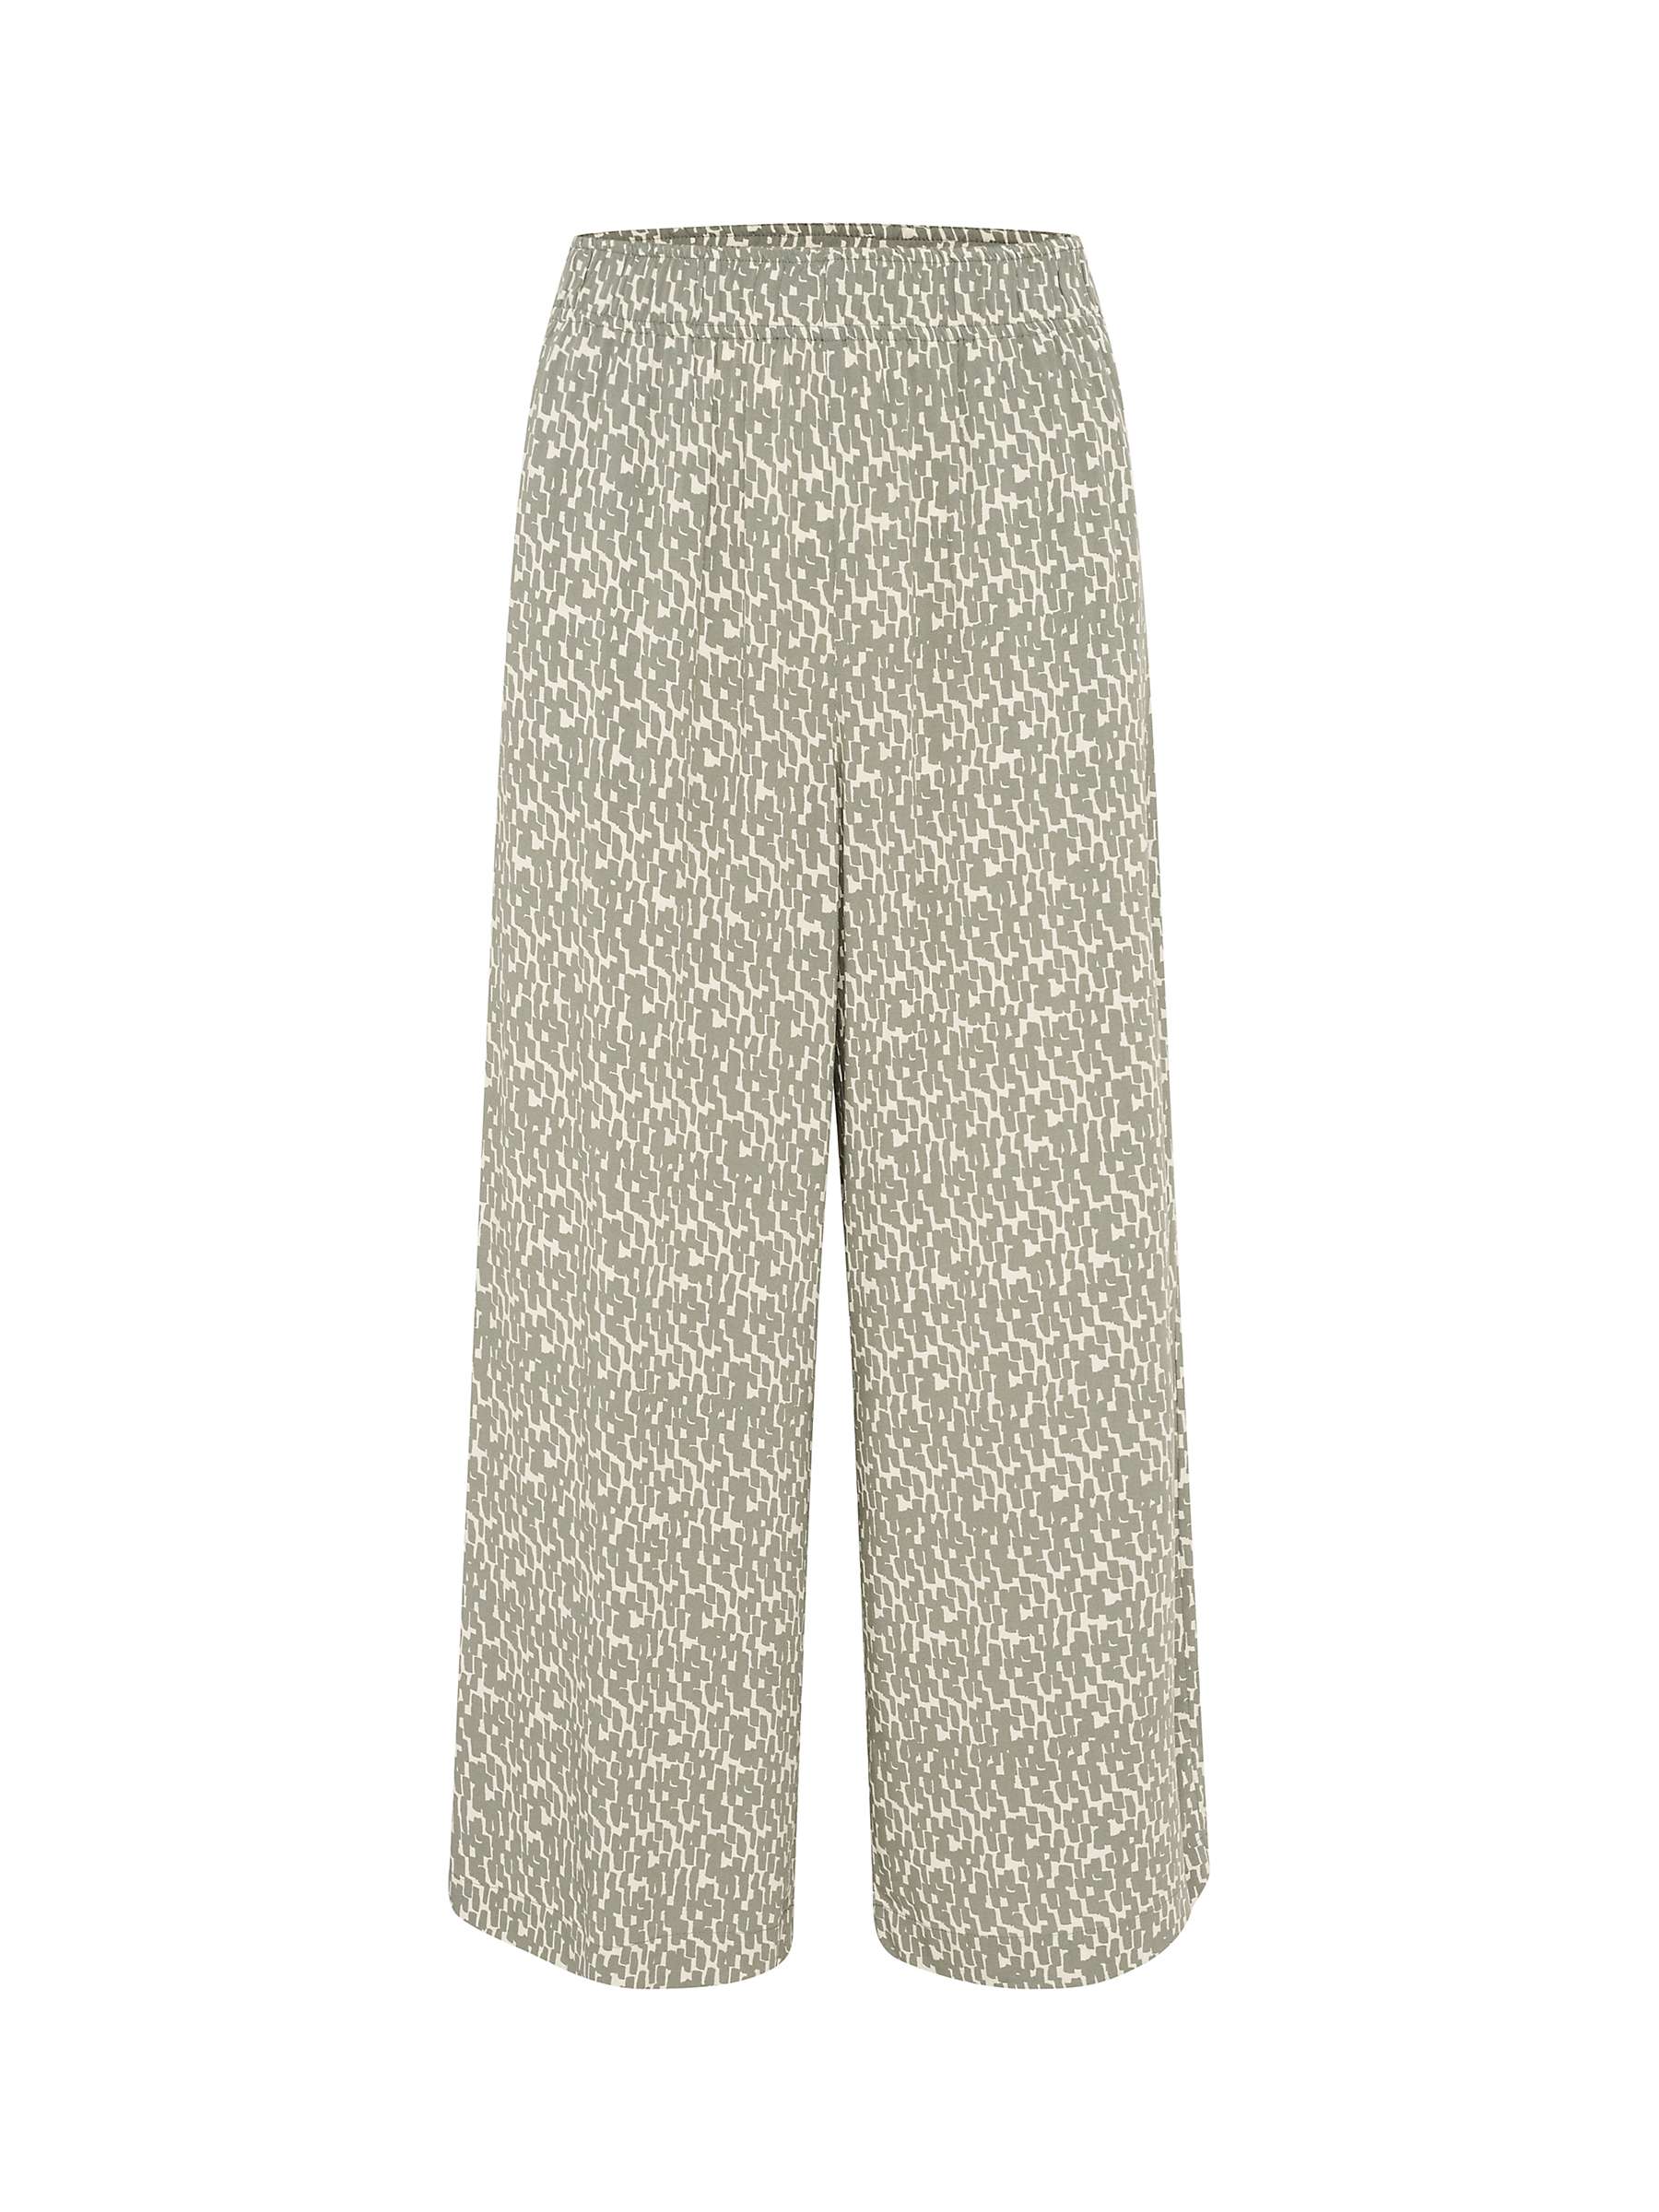 Buy Part Two Alfi Elasticated Wide Leg Trousers, Agave Green Online at johnlewis.com